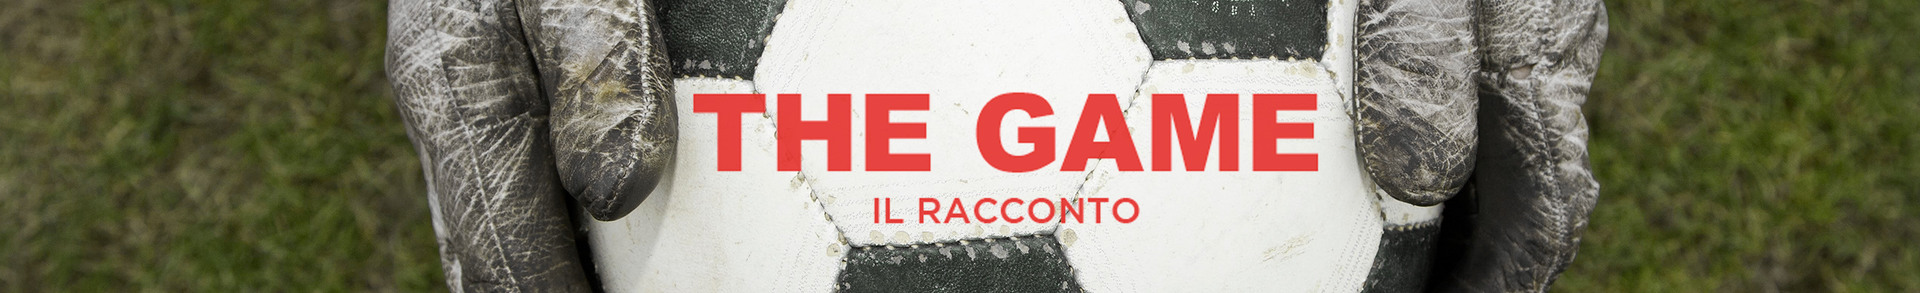 SIENA PREVIEW FOR "THE GAME" BY DANILO CORREALE – WINNER OF THE 14th EDITION OF THE ERMANNO CASOLI PRIZE 